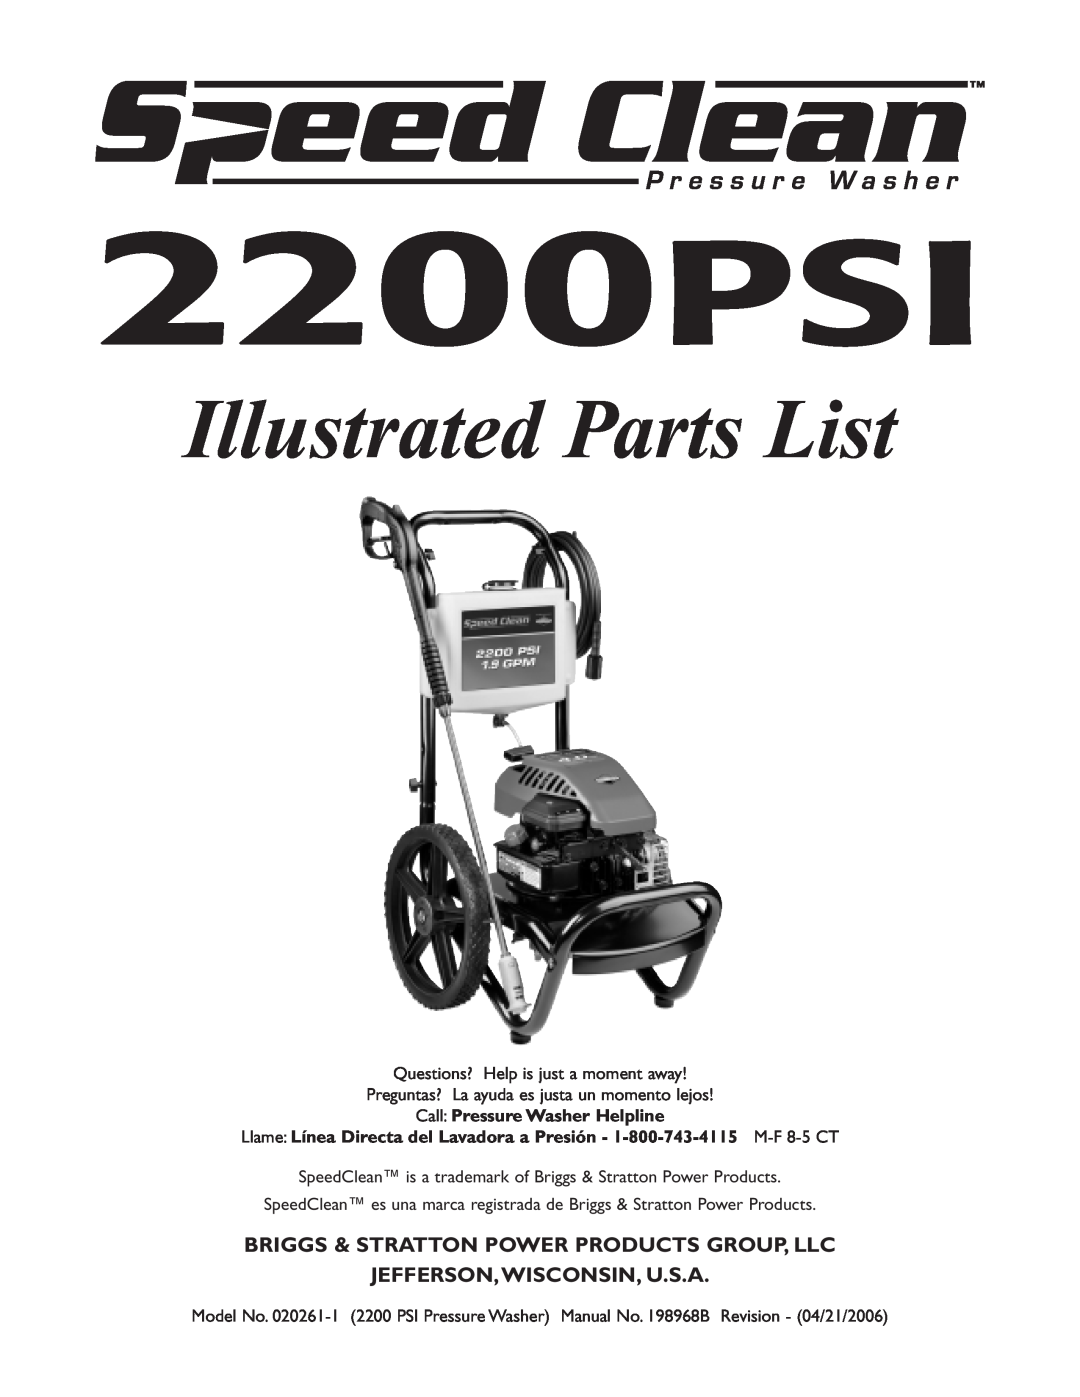 Briggs & Stratton 020261-1 manual 2200PSI, Illustrated Parts List, Briggs & Stratton Power Products Group, Llc 